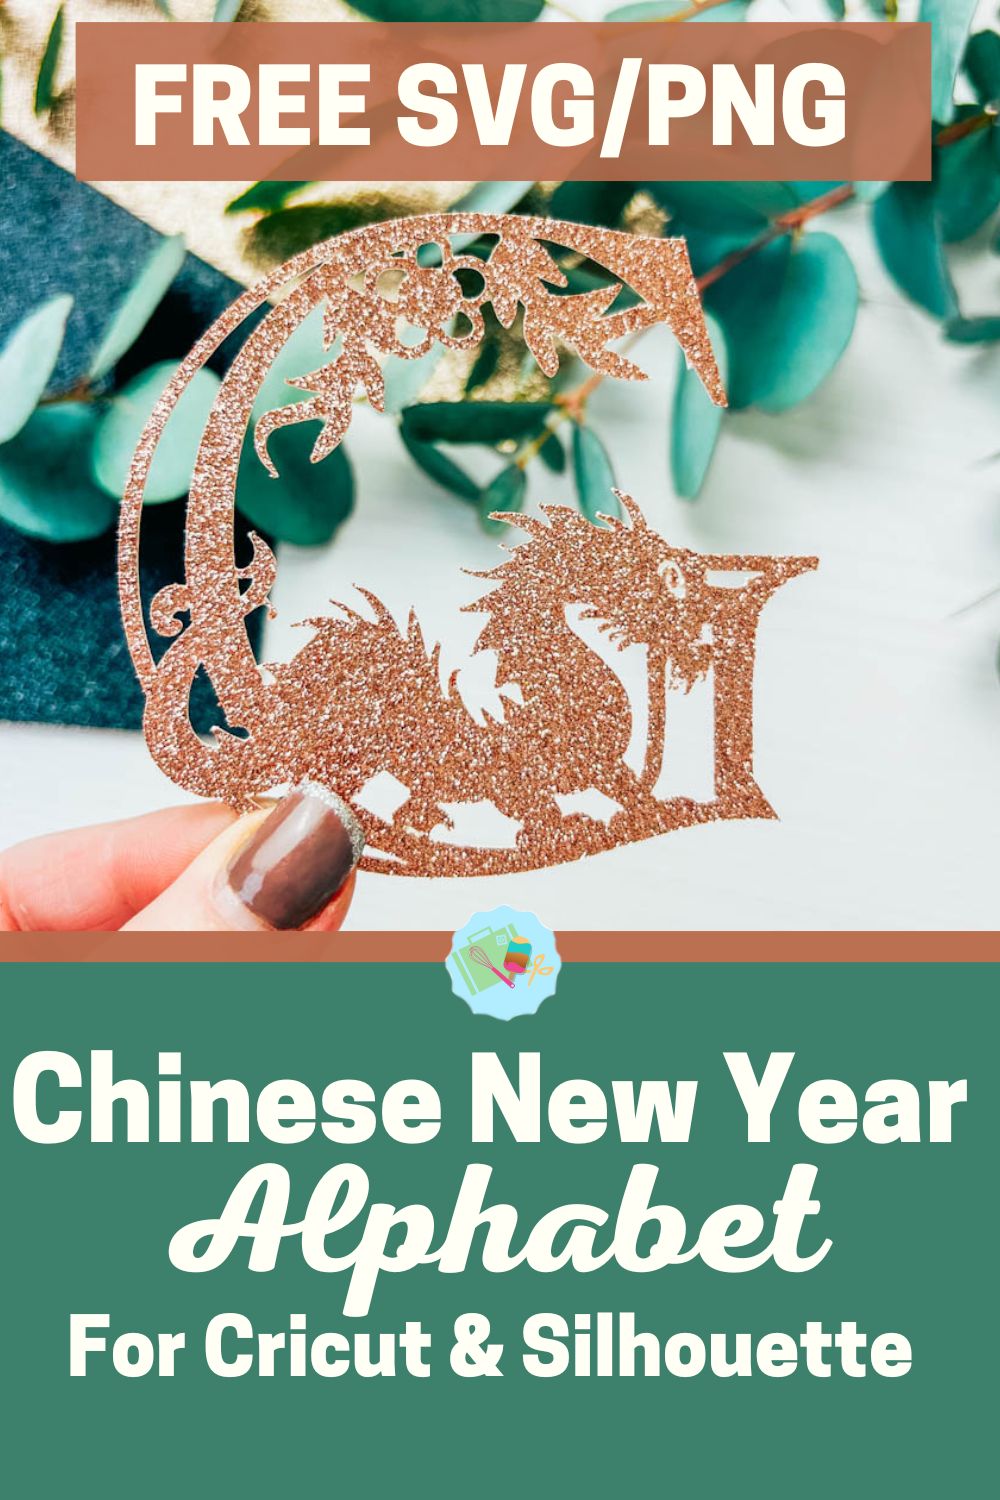 SVG PNG Chinese New Year, Year of the Dragon Alphabet letters and numbers for Cricut and Silhouette